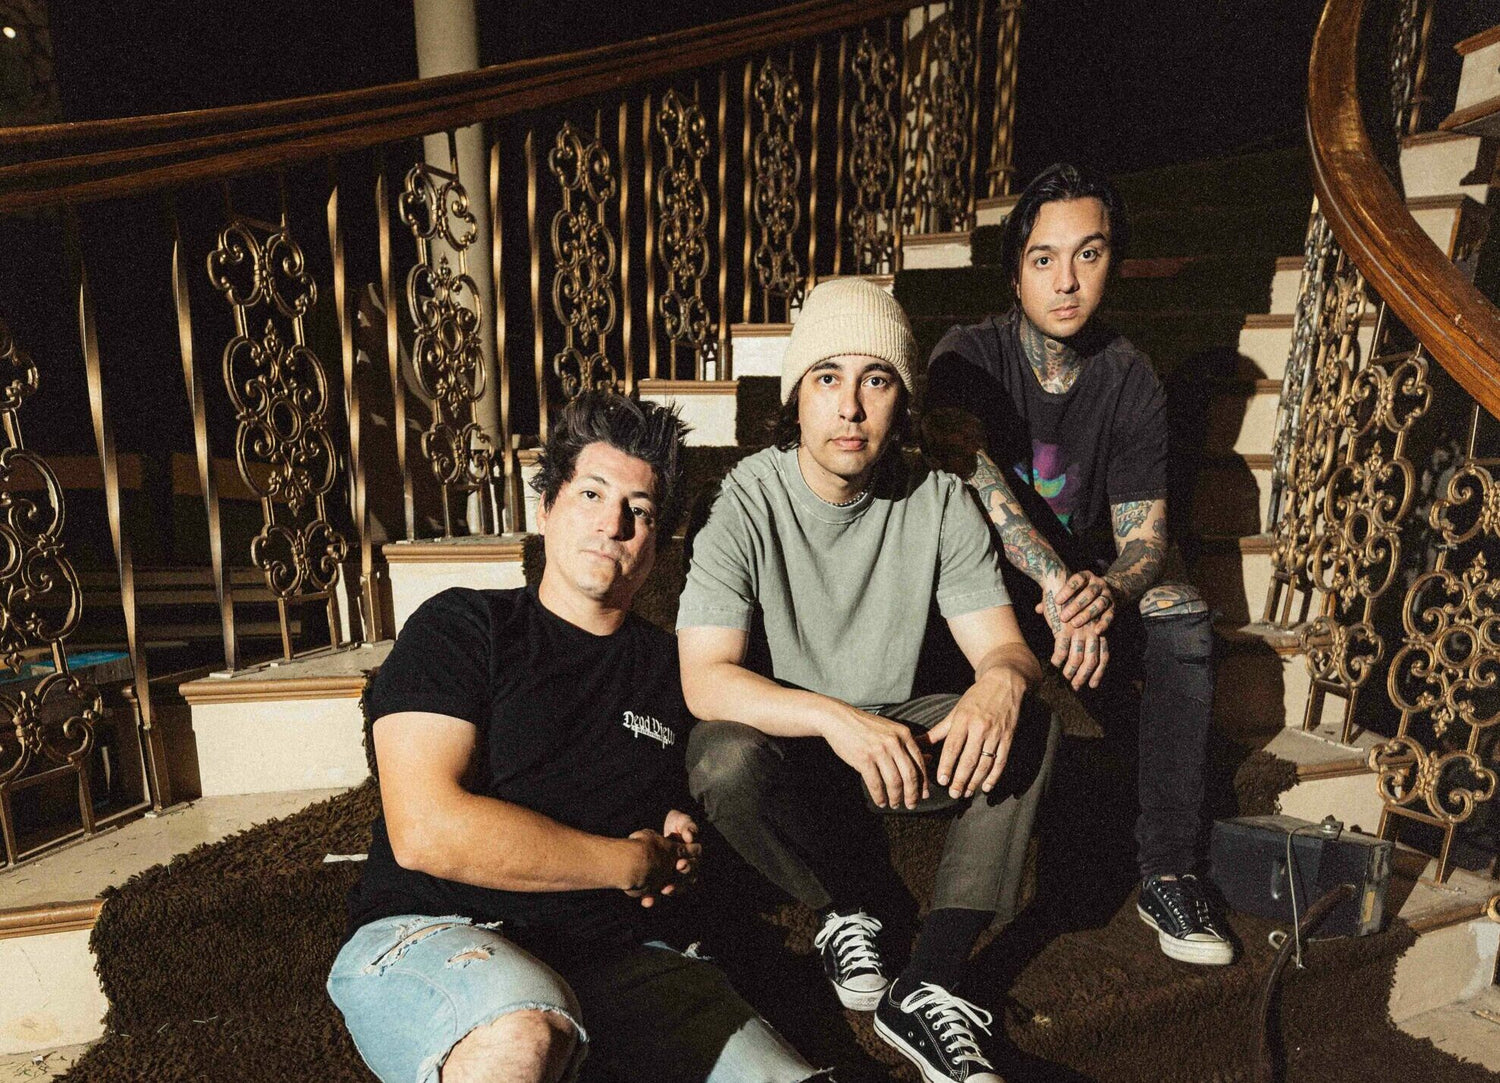 PIERCE THE VEIL ENLIST L.S. DUNES, DAYSEEKER AND DESTROY BOYS FOR THE JAWS OF LIFE TOUR